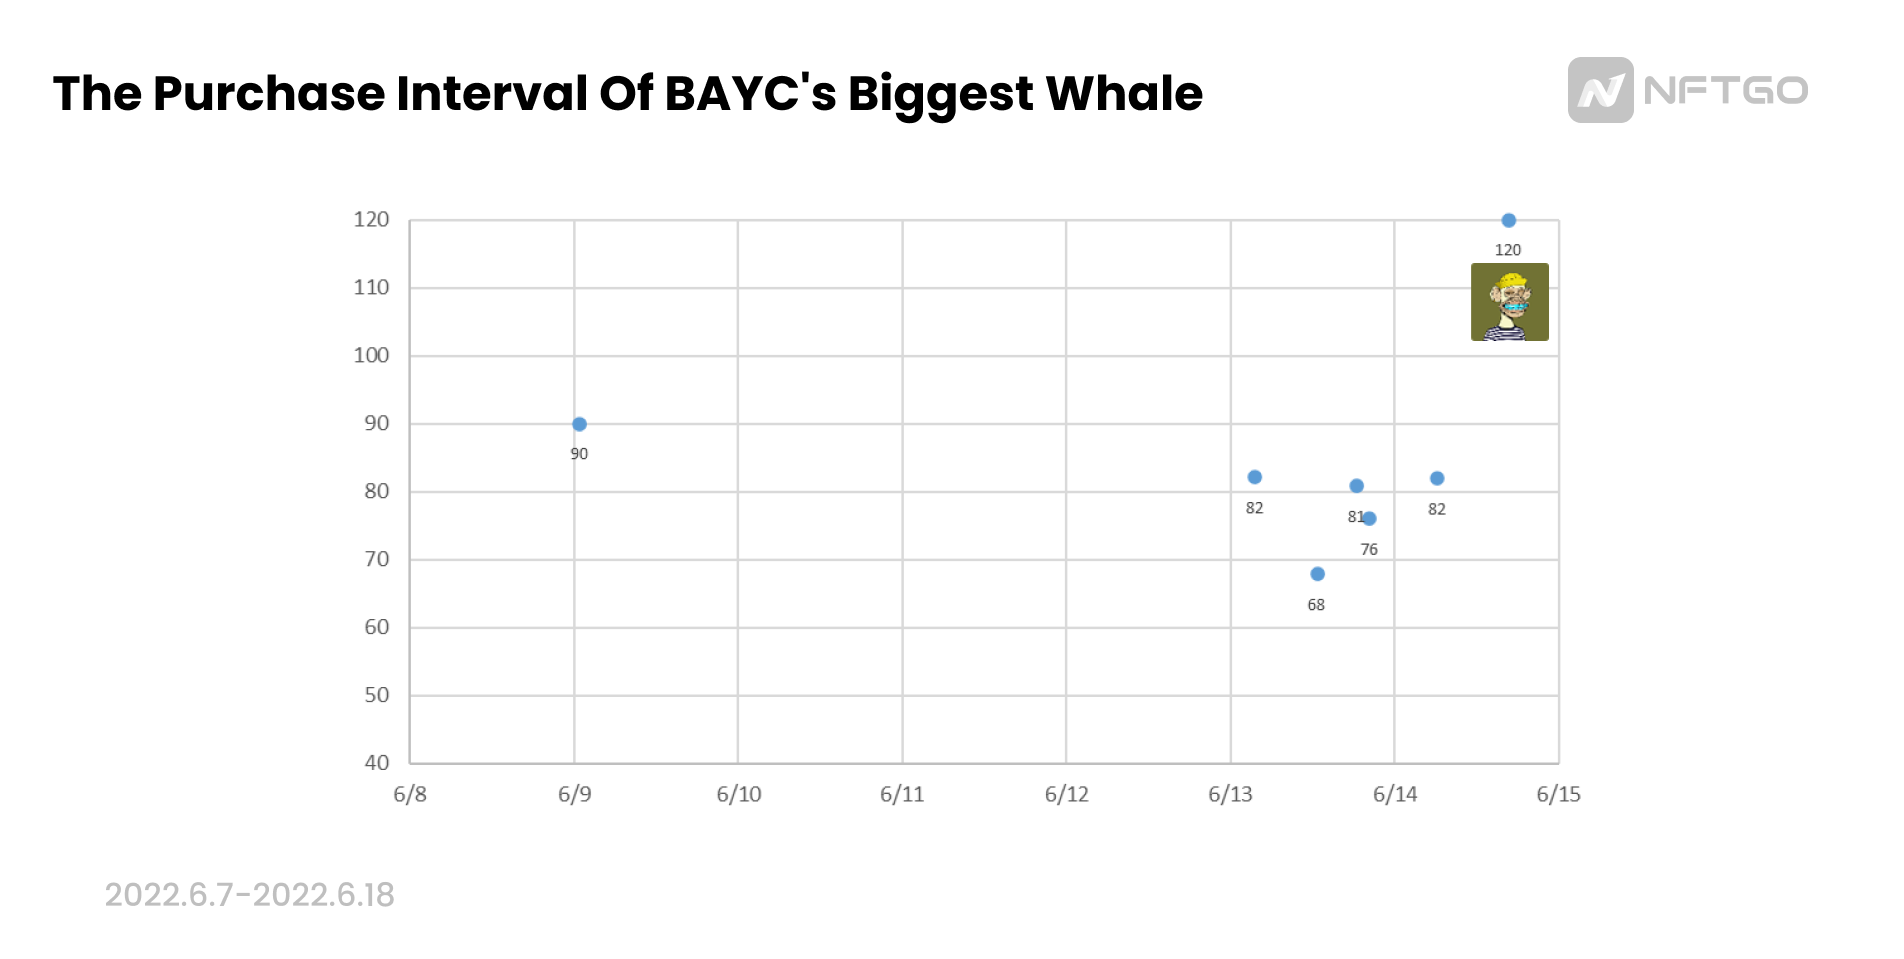 The Purchase Interval of BAYC's Biggest Whale (Source: NFTGo.io)